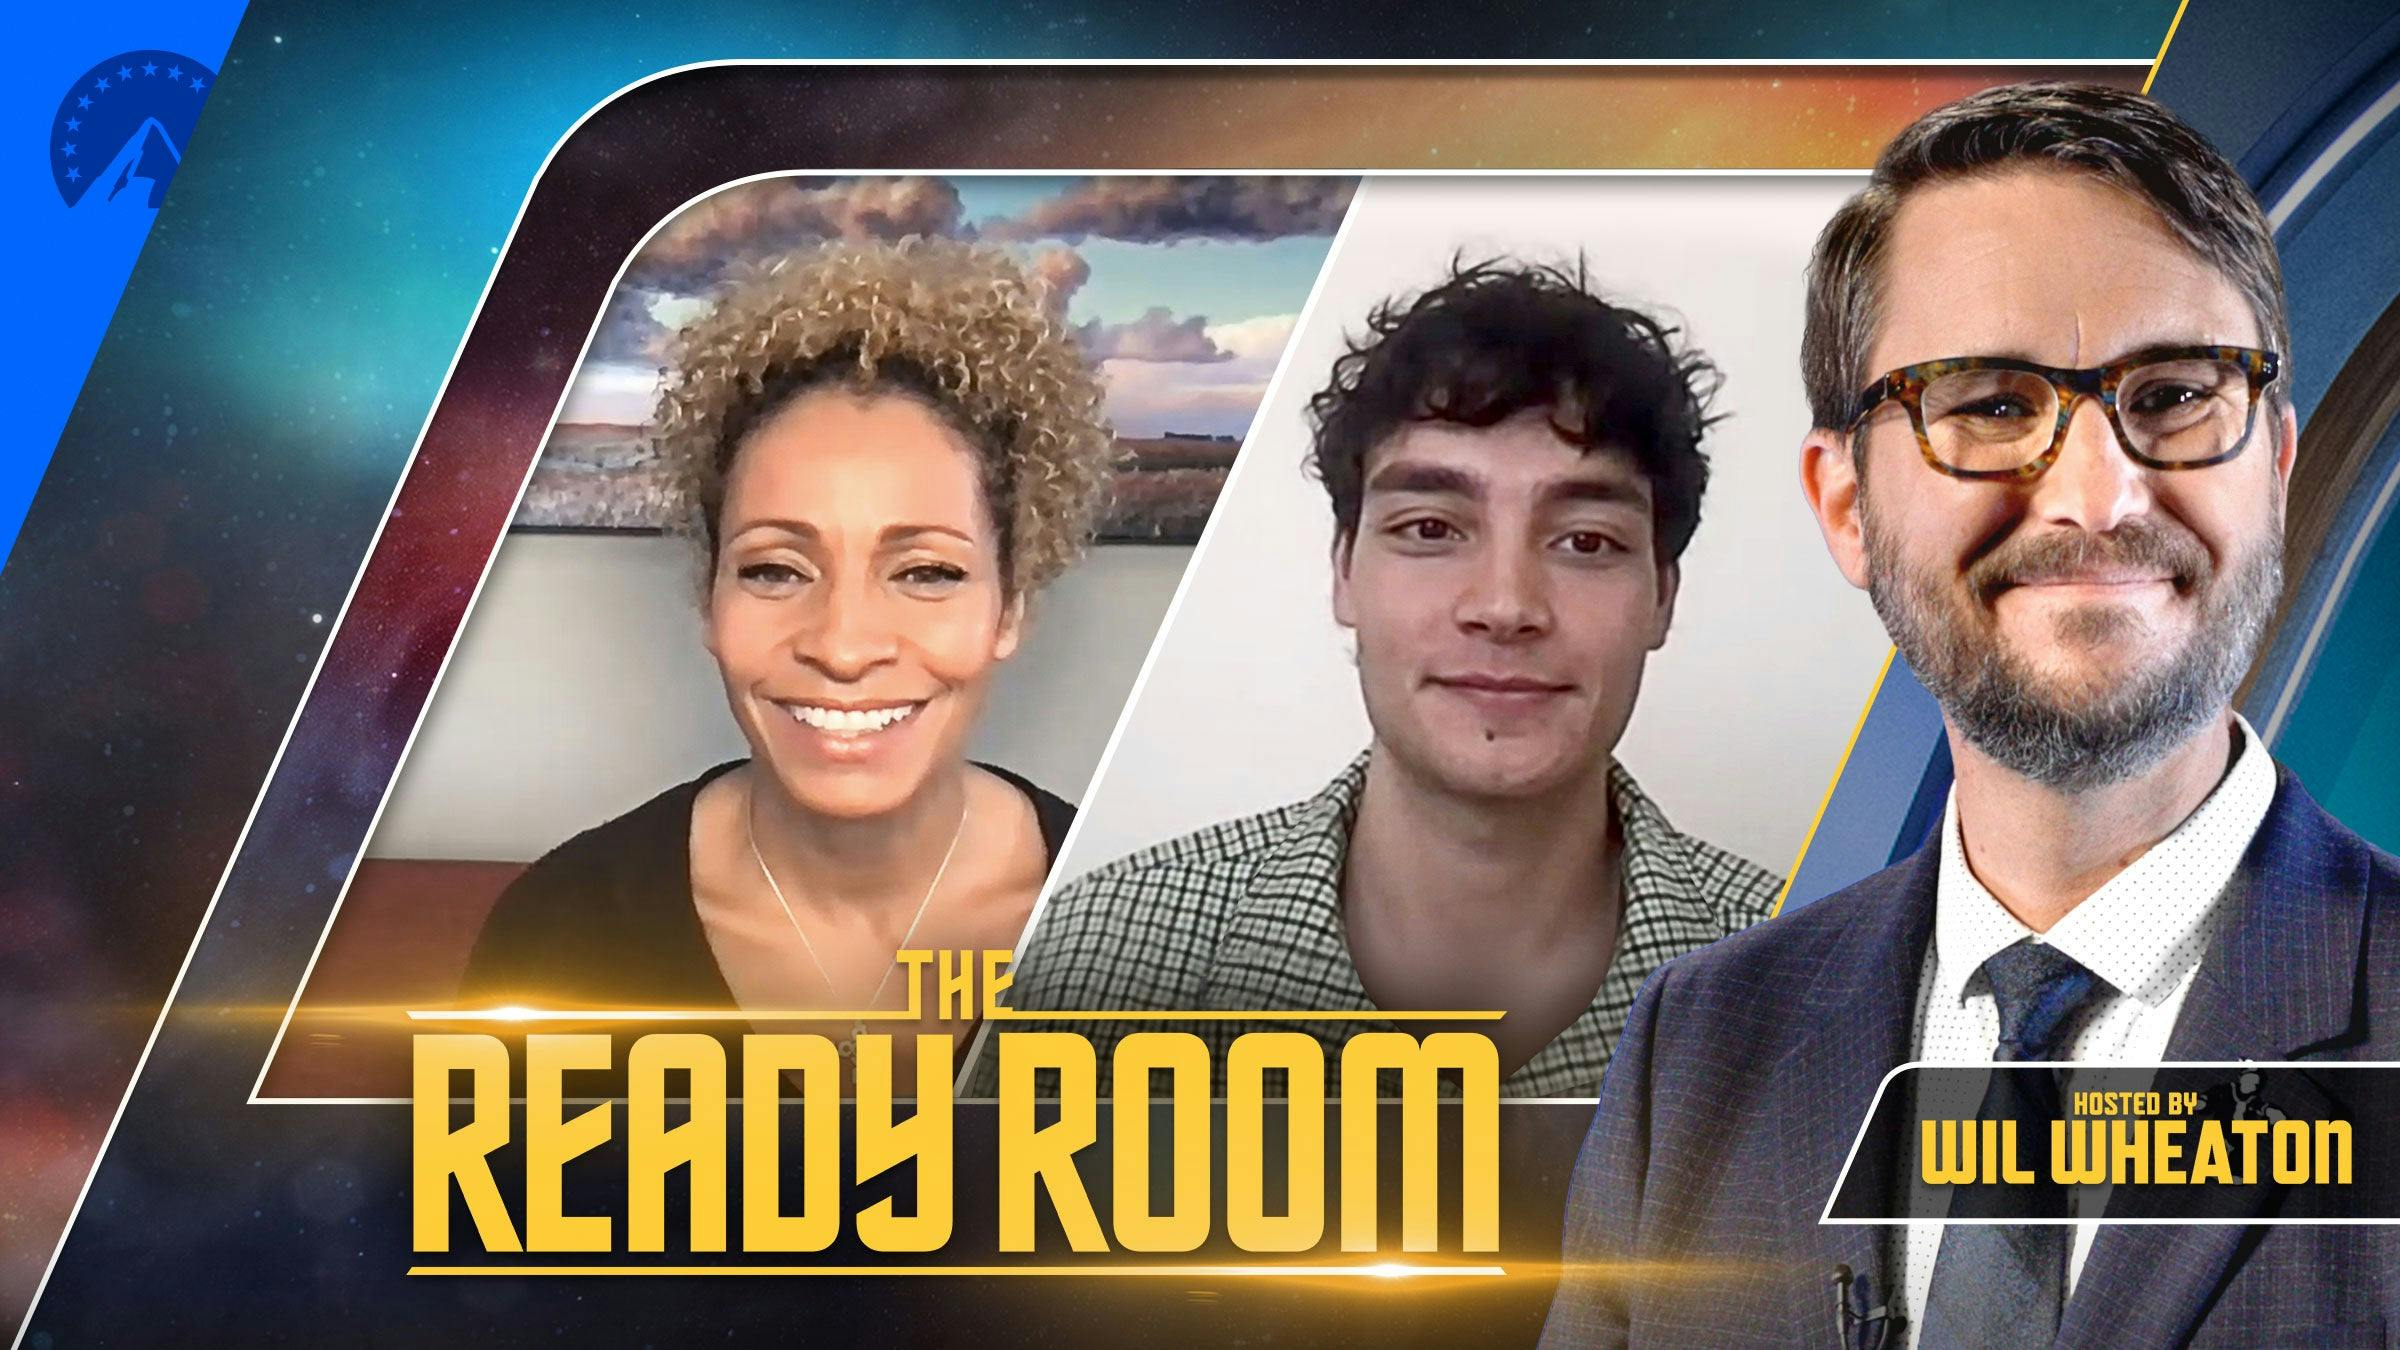 Image of Michelle Hurd, Evan Evagora, and Wil Wheaton in promotion of the newest installment of The Ready Room.